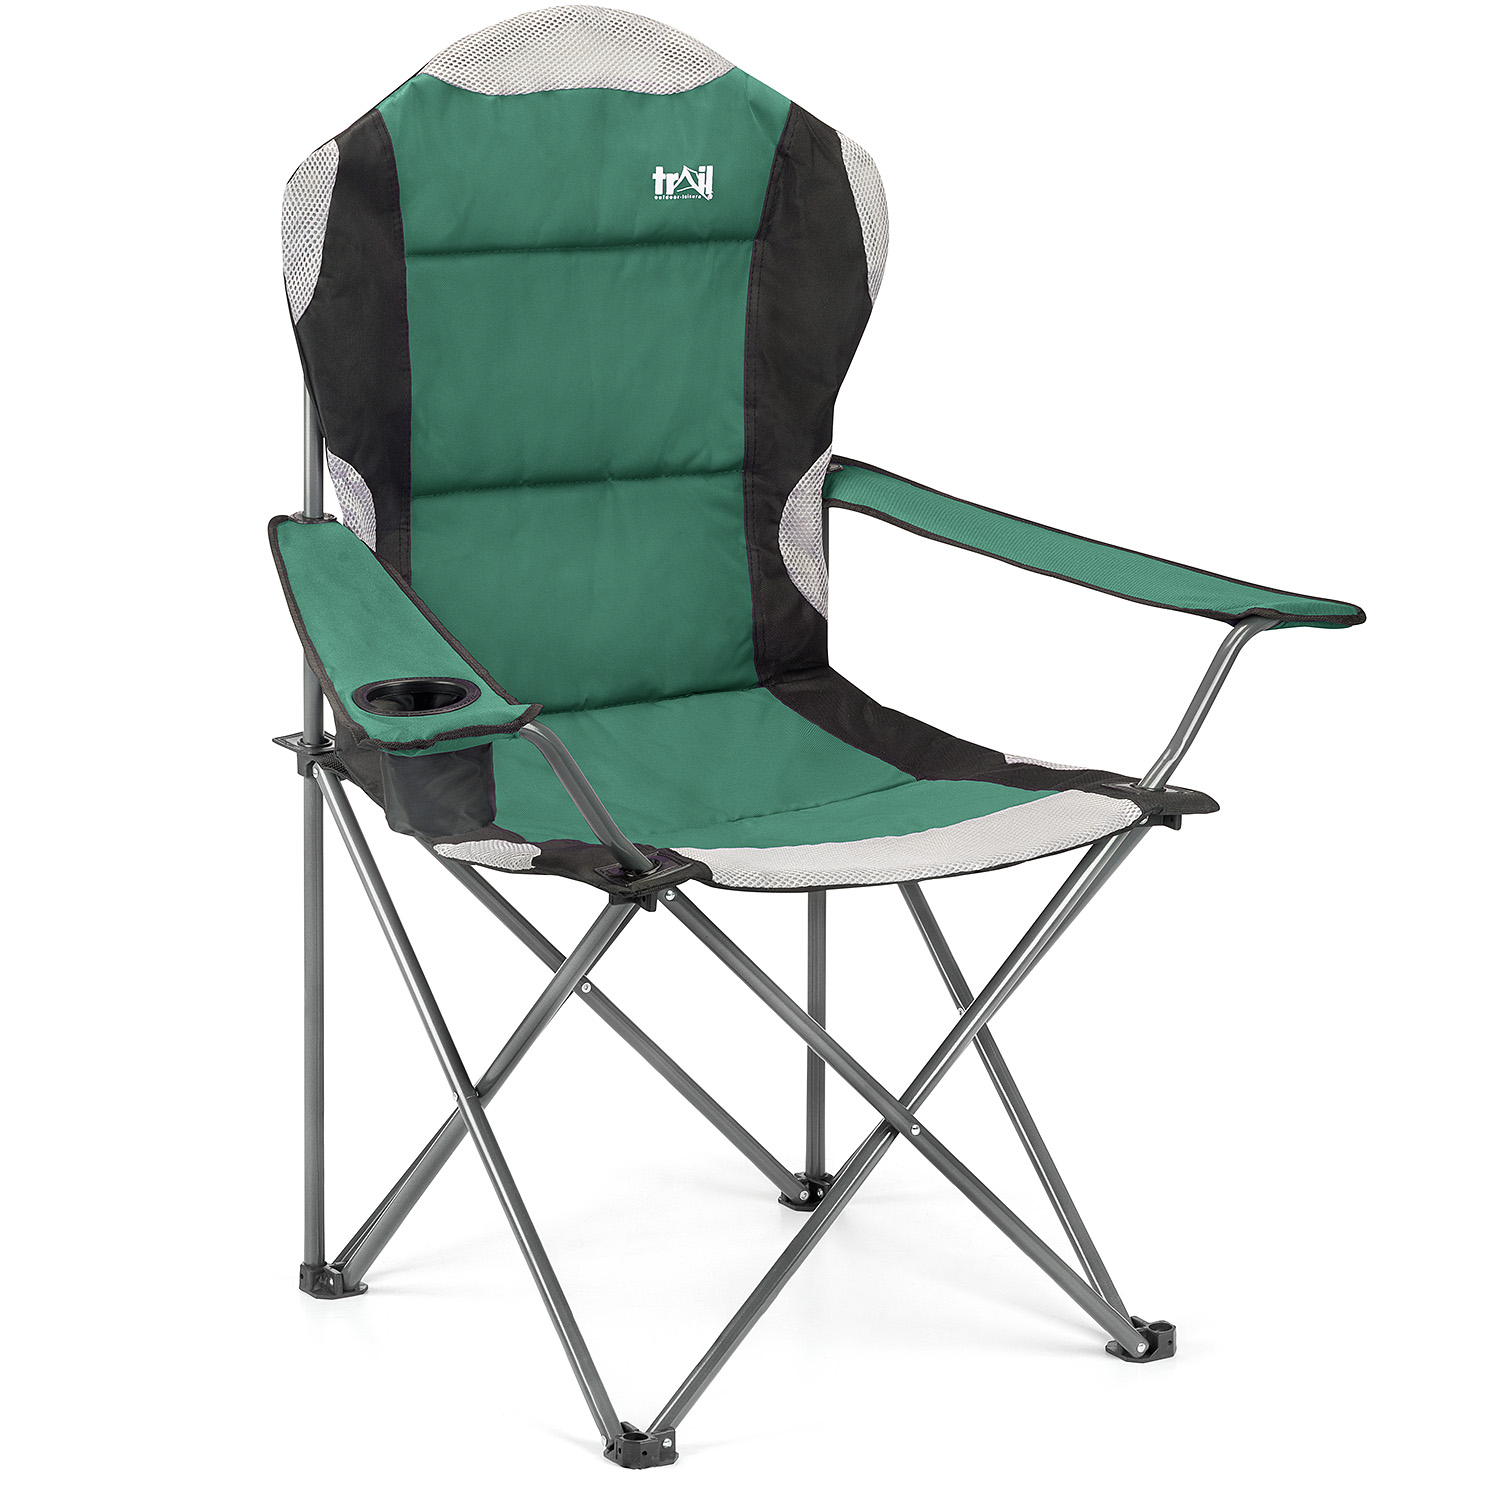 Trespass High Back Padded Camping Chair 